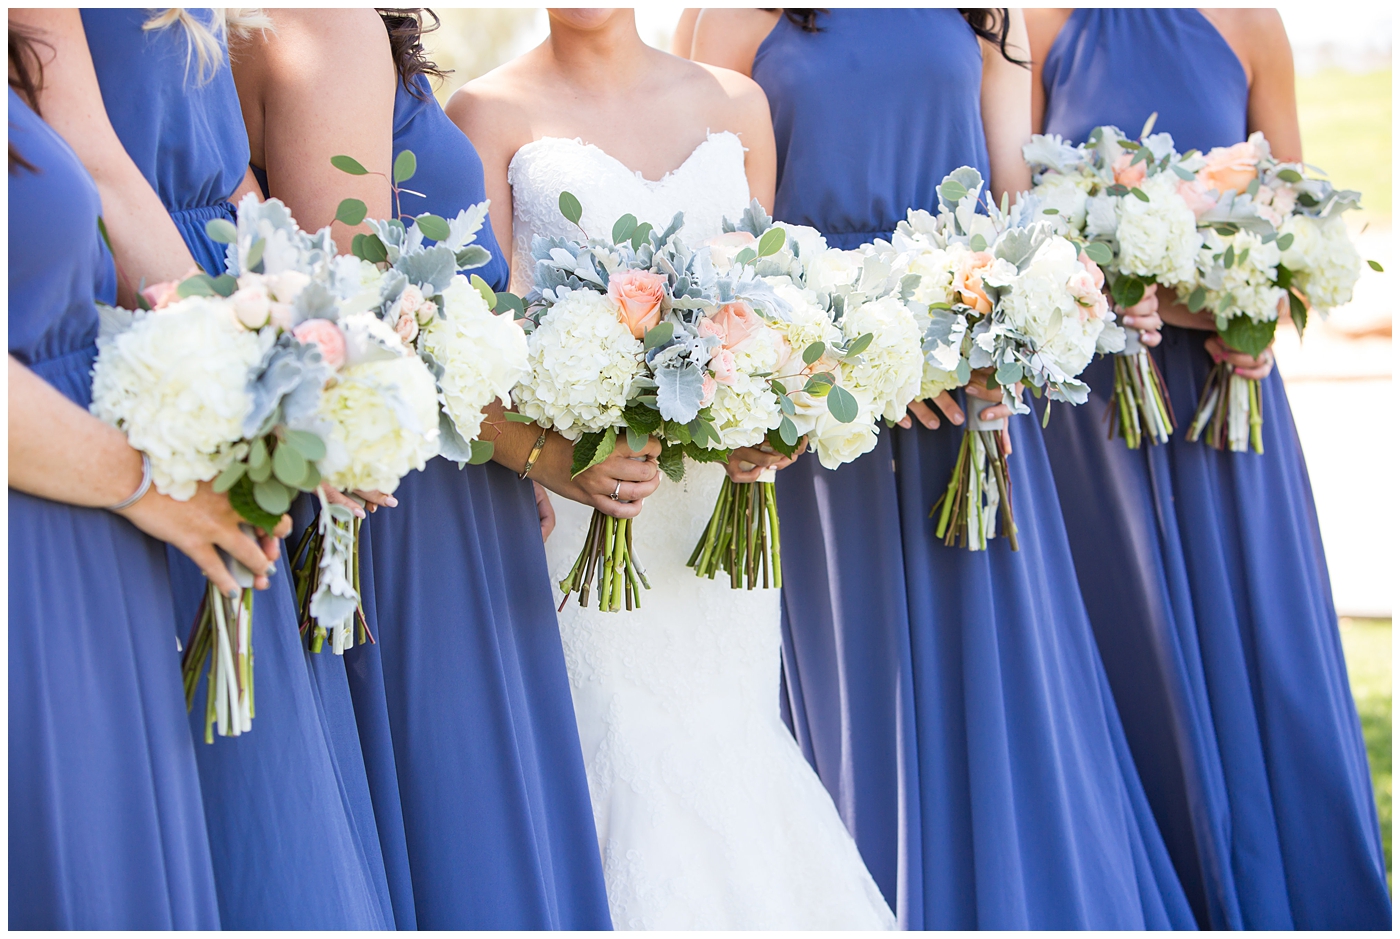 Bride in strapless maggie sorrento dress with soft white and pink roses bouquet with bridesmaids in long blue maxi dresses with bouquets bridal party wedding day pictures